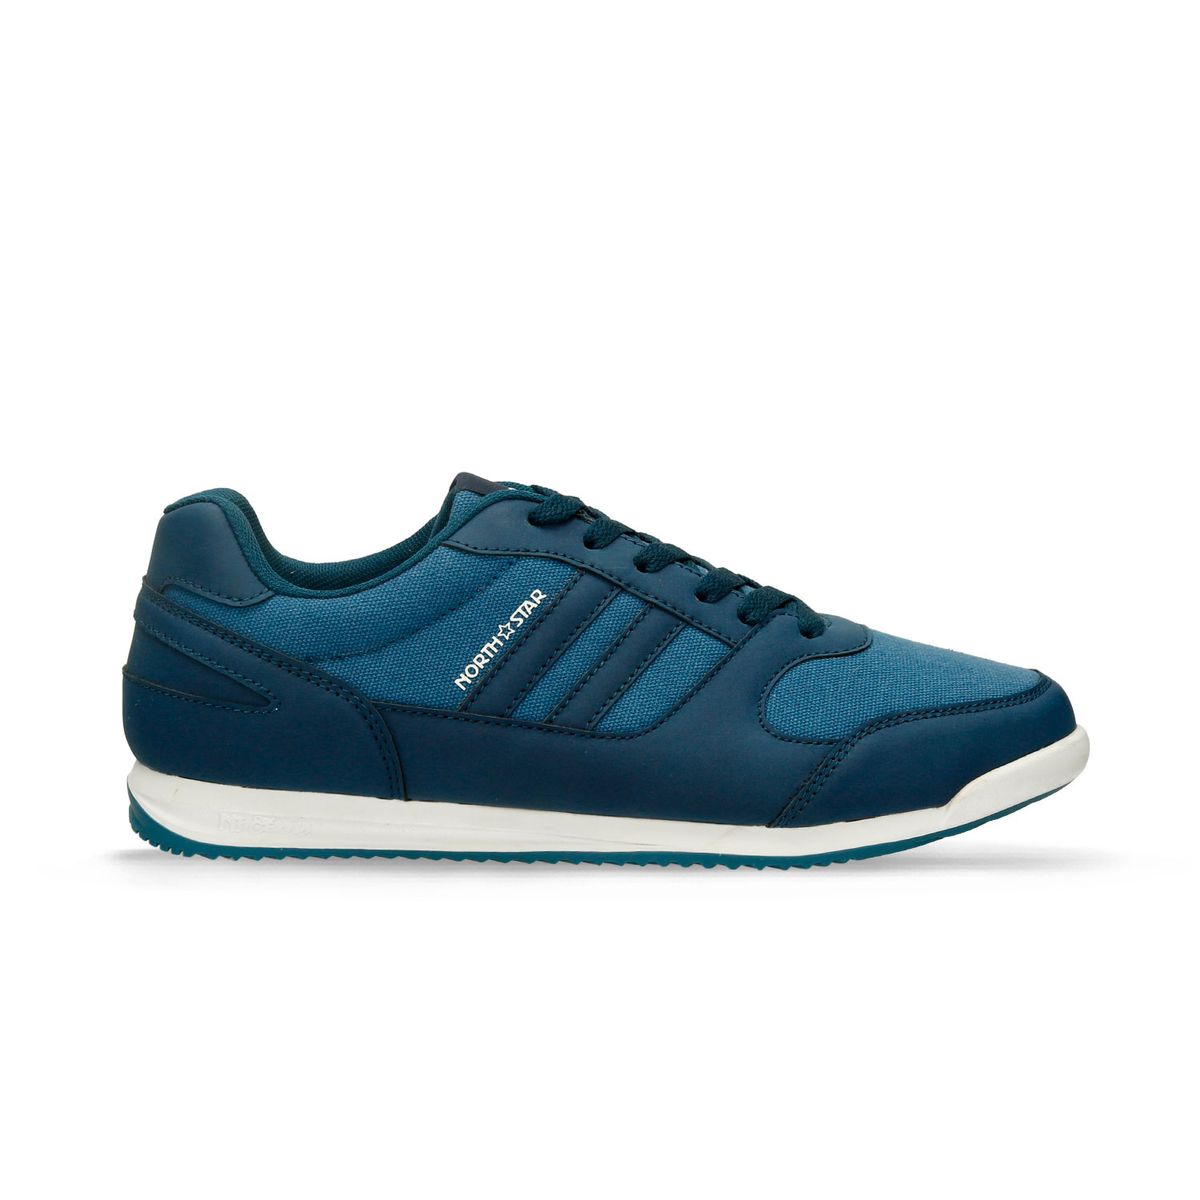 Tenis Casuales Azul North Star Fred Petronas Hombre